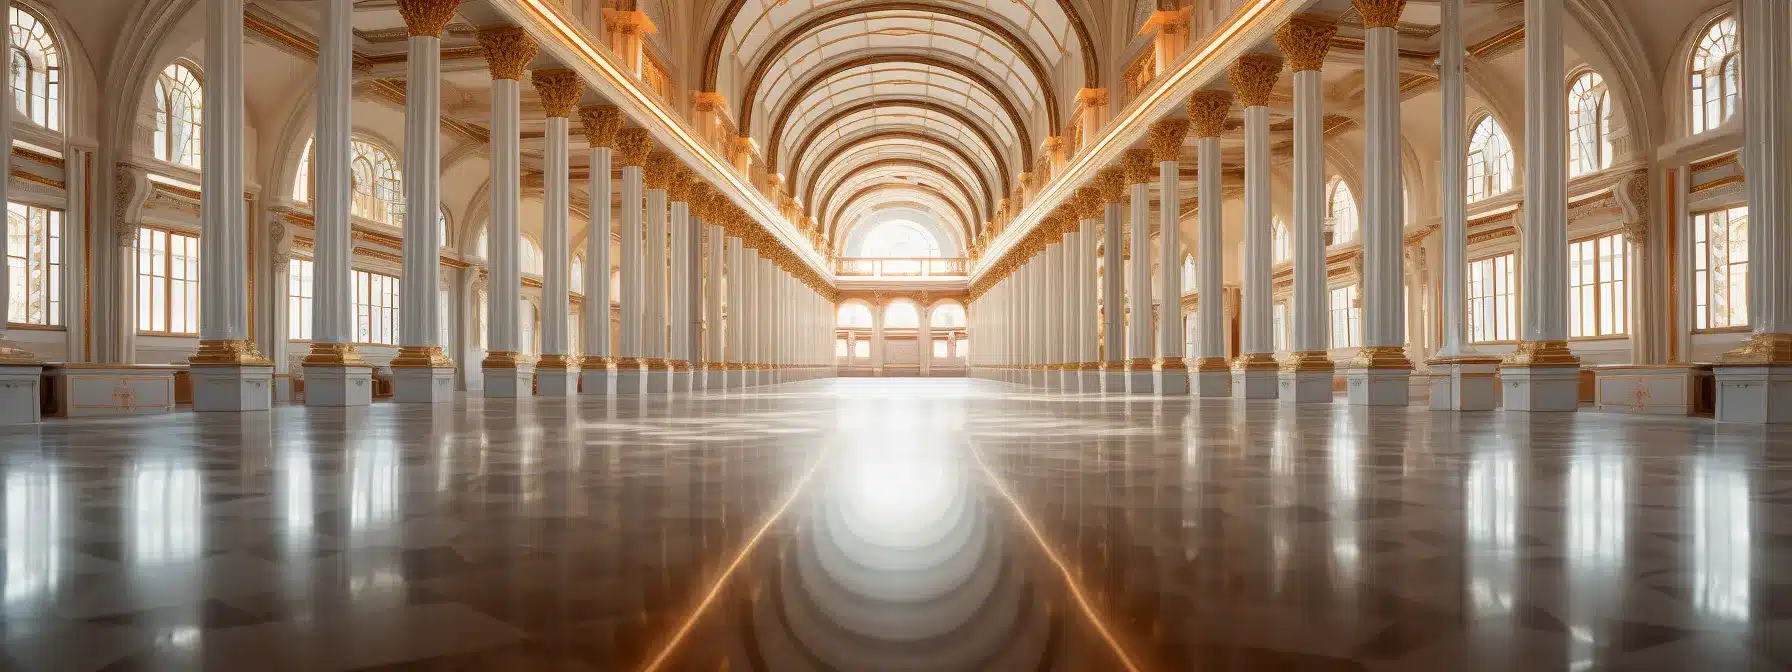 An Image Of A Grand Hall Filled With Mirrors, Reflecting And Distorting Brand Perceptions With Social Media Interactions.